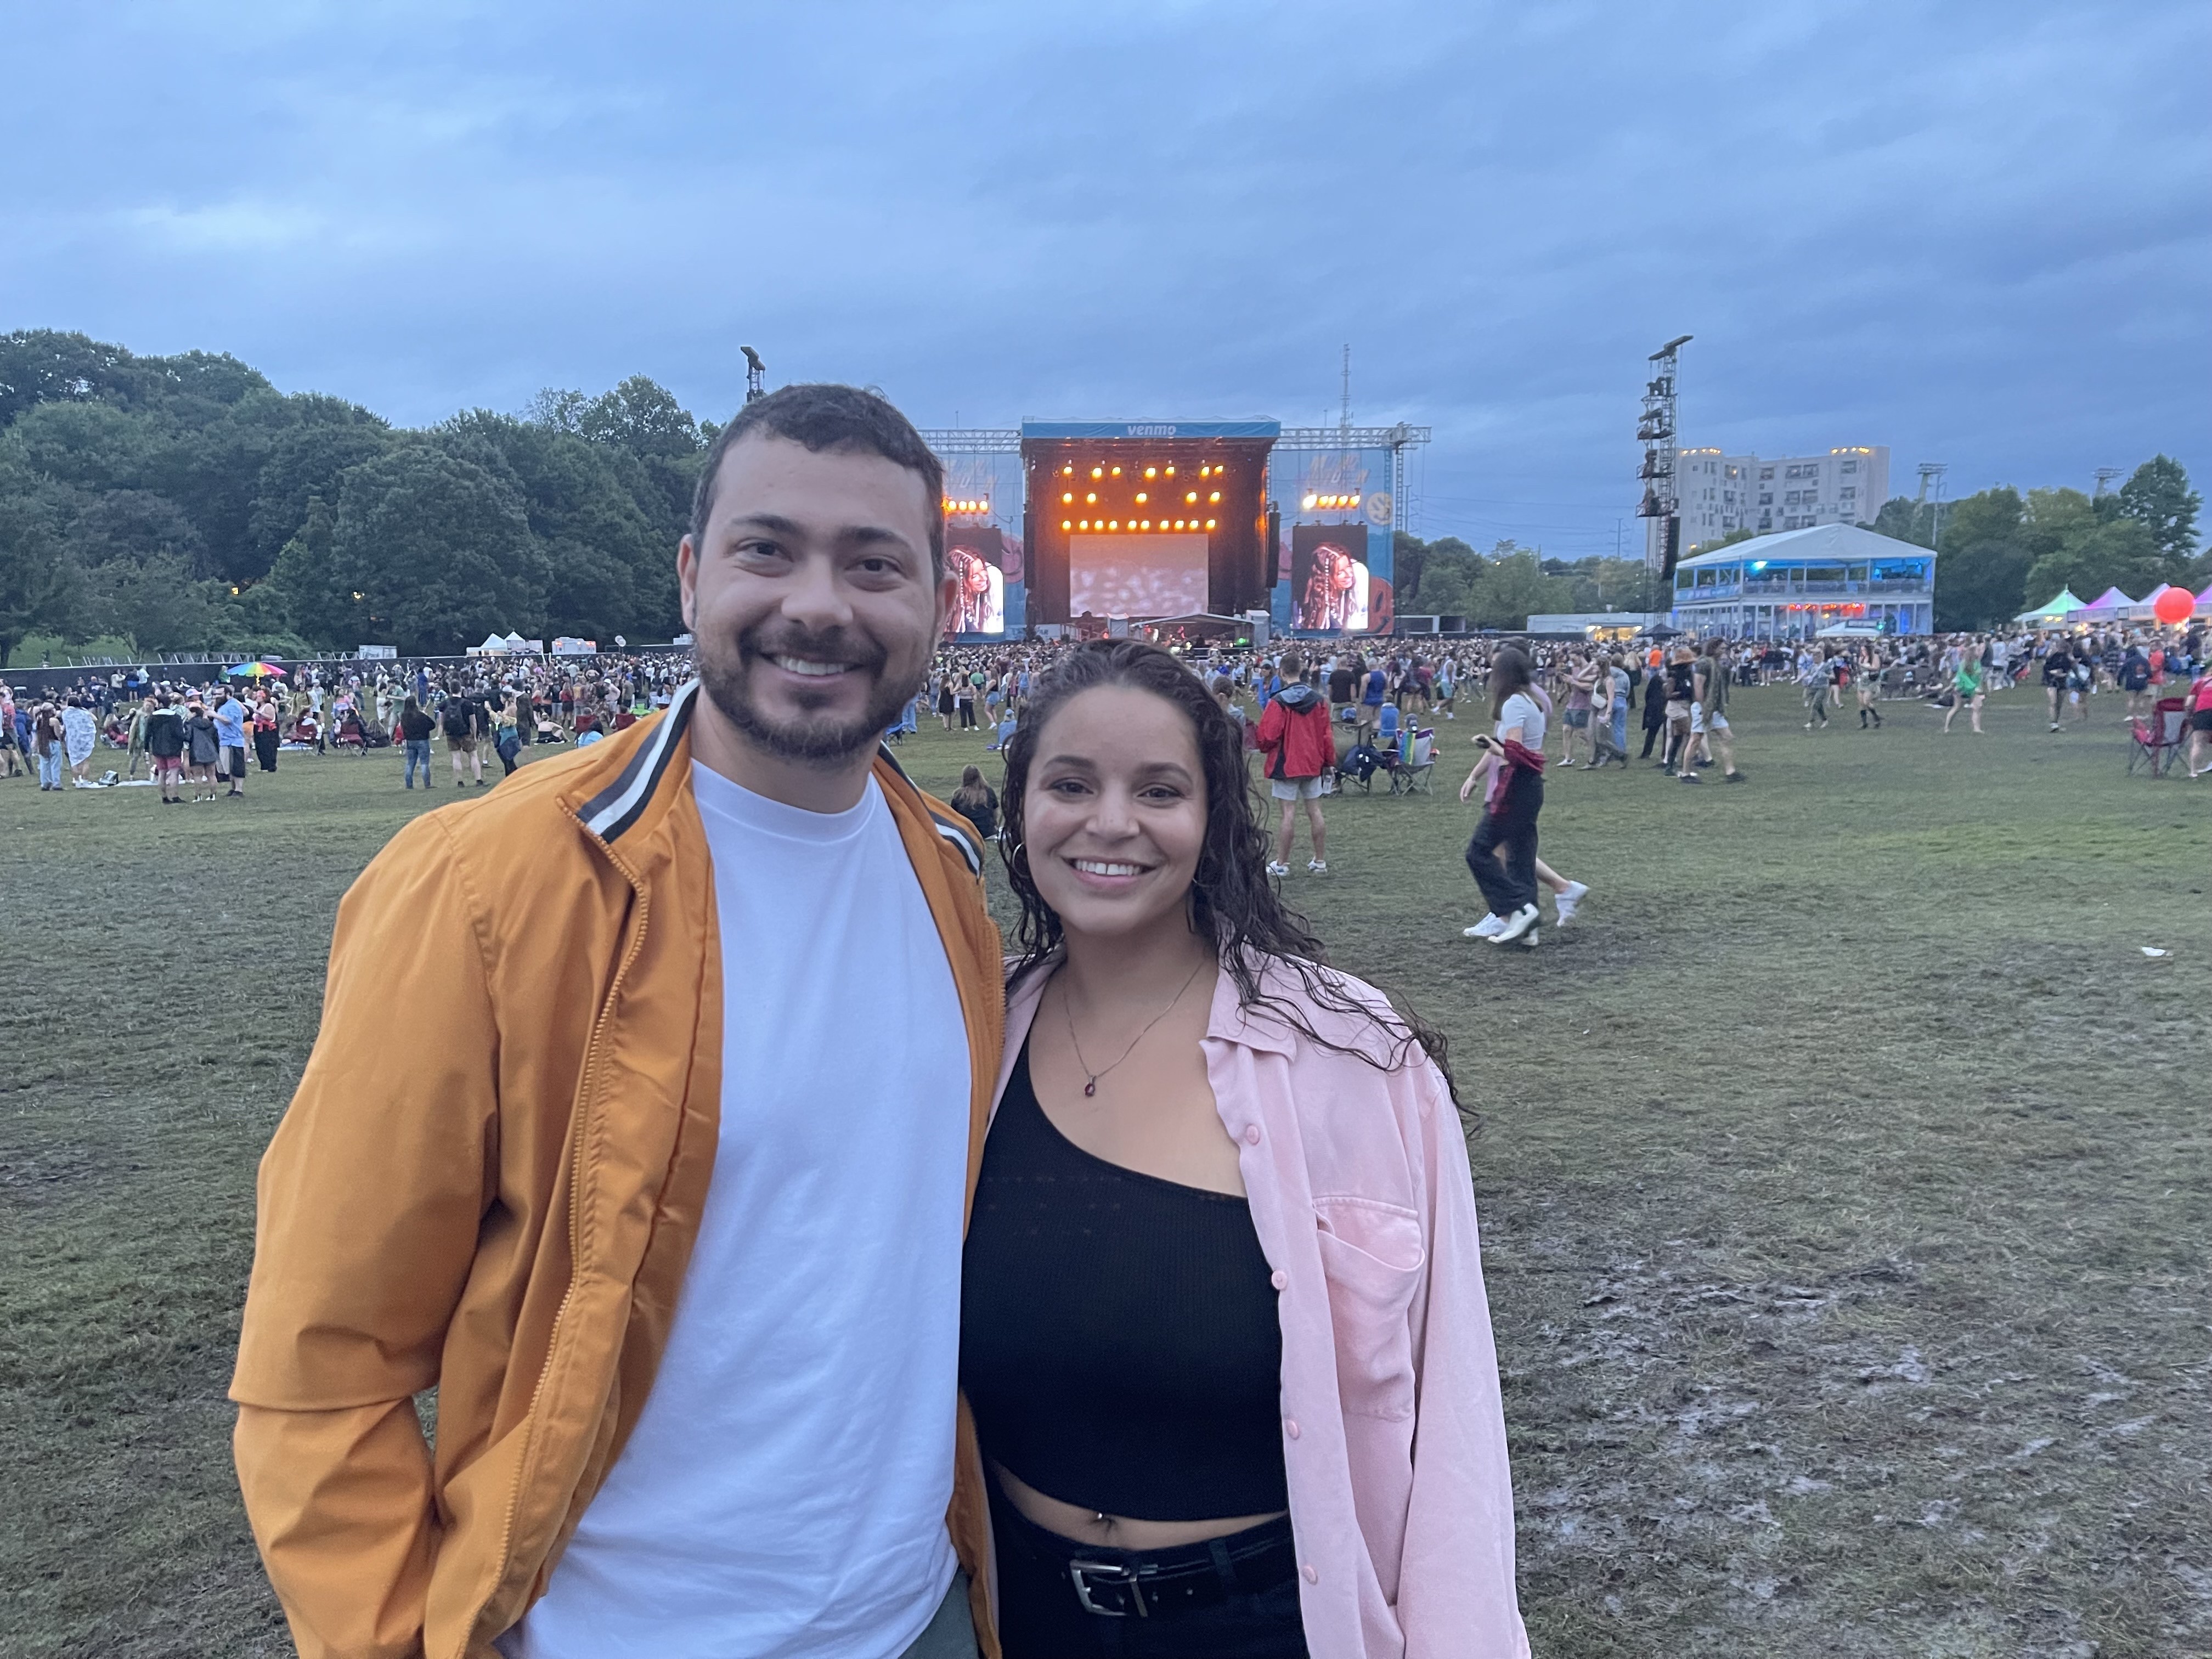 Two students at a local music festival in Atlanta Georgia